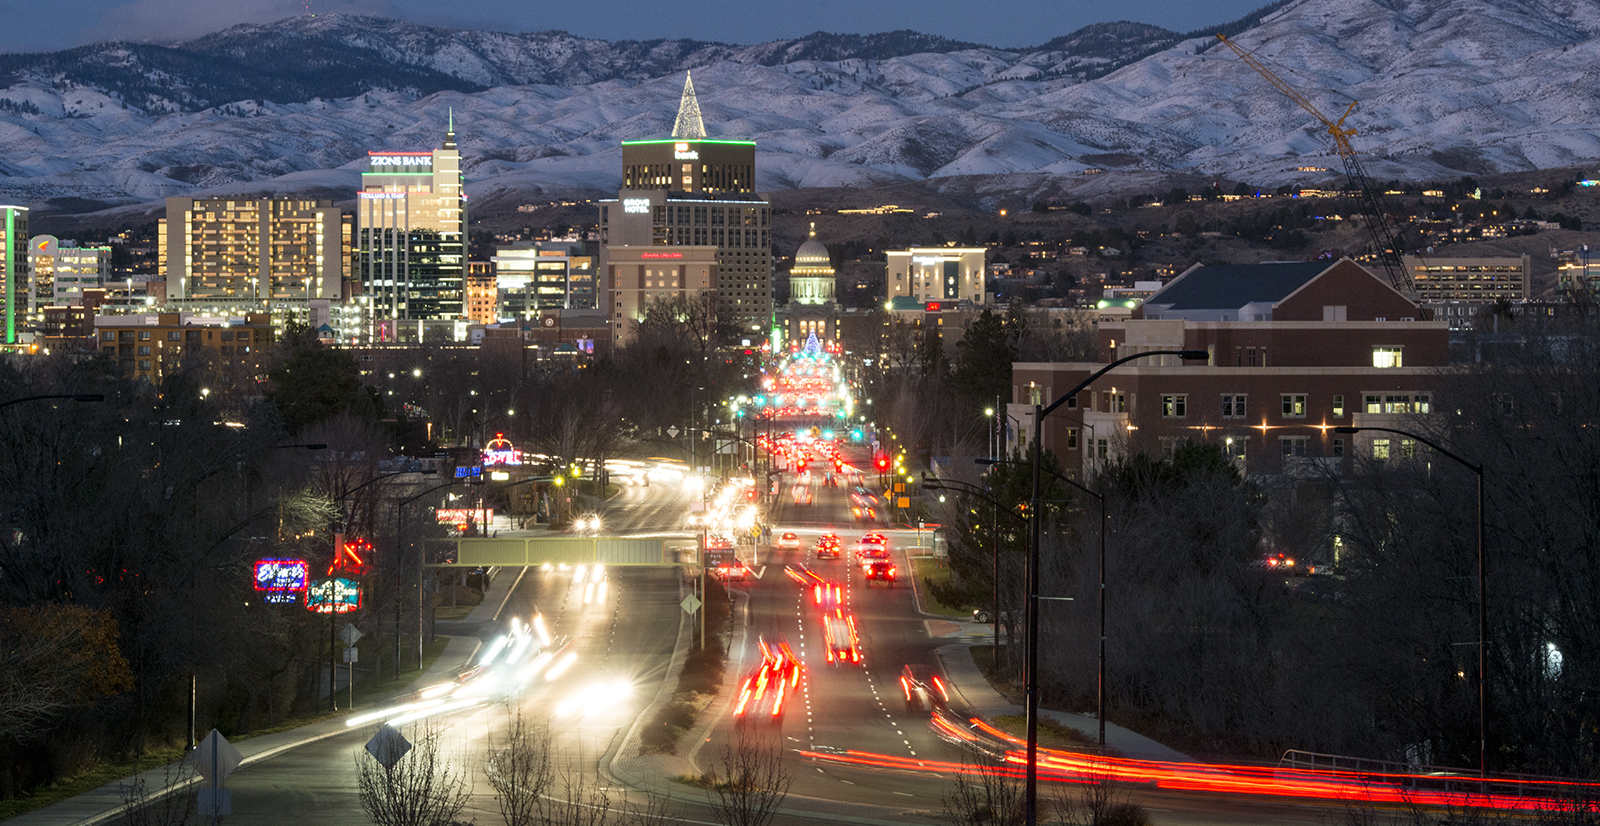 Boise downtown at night